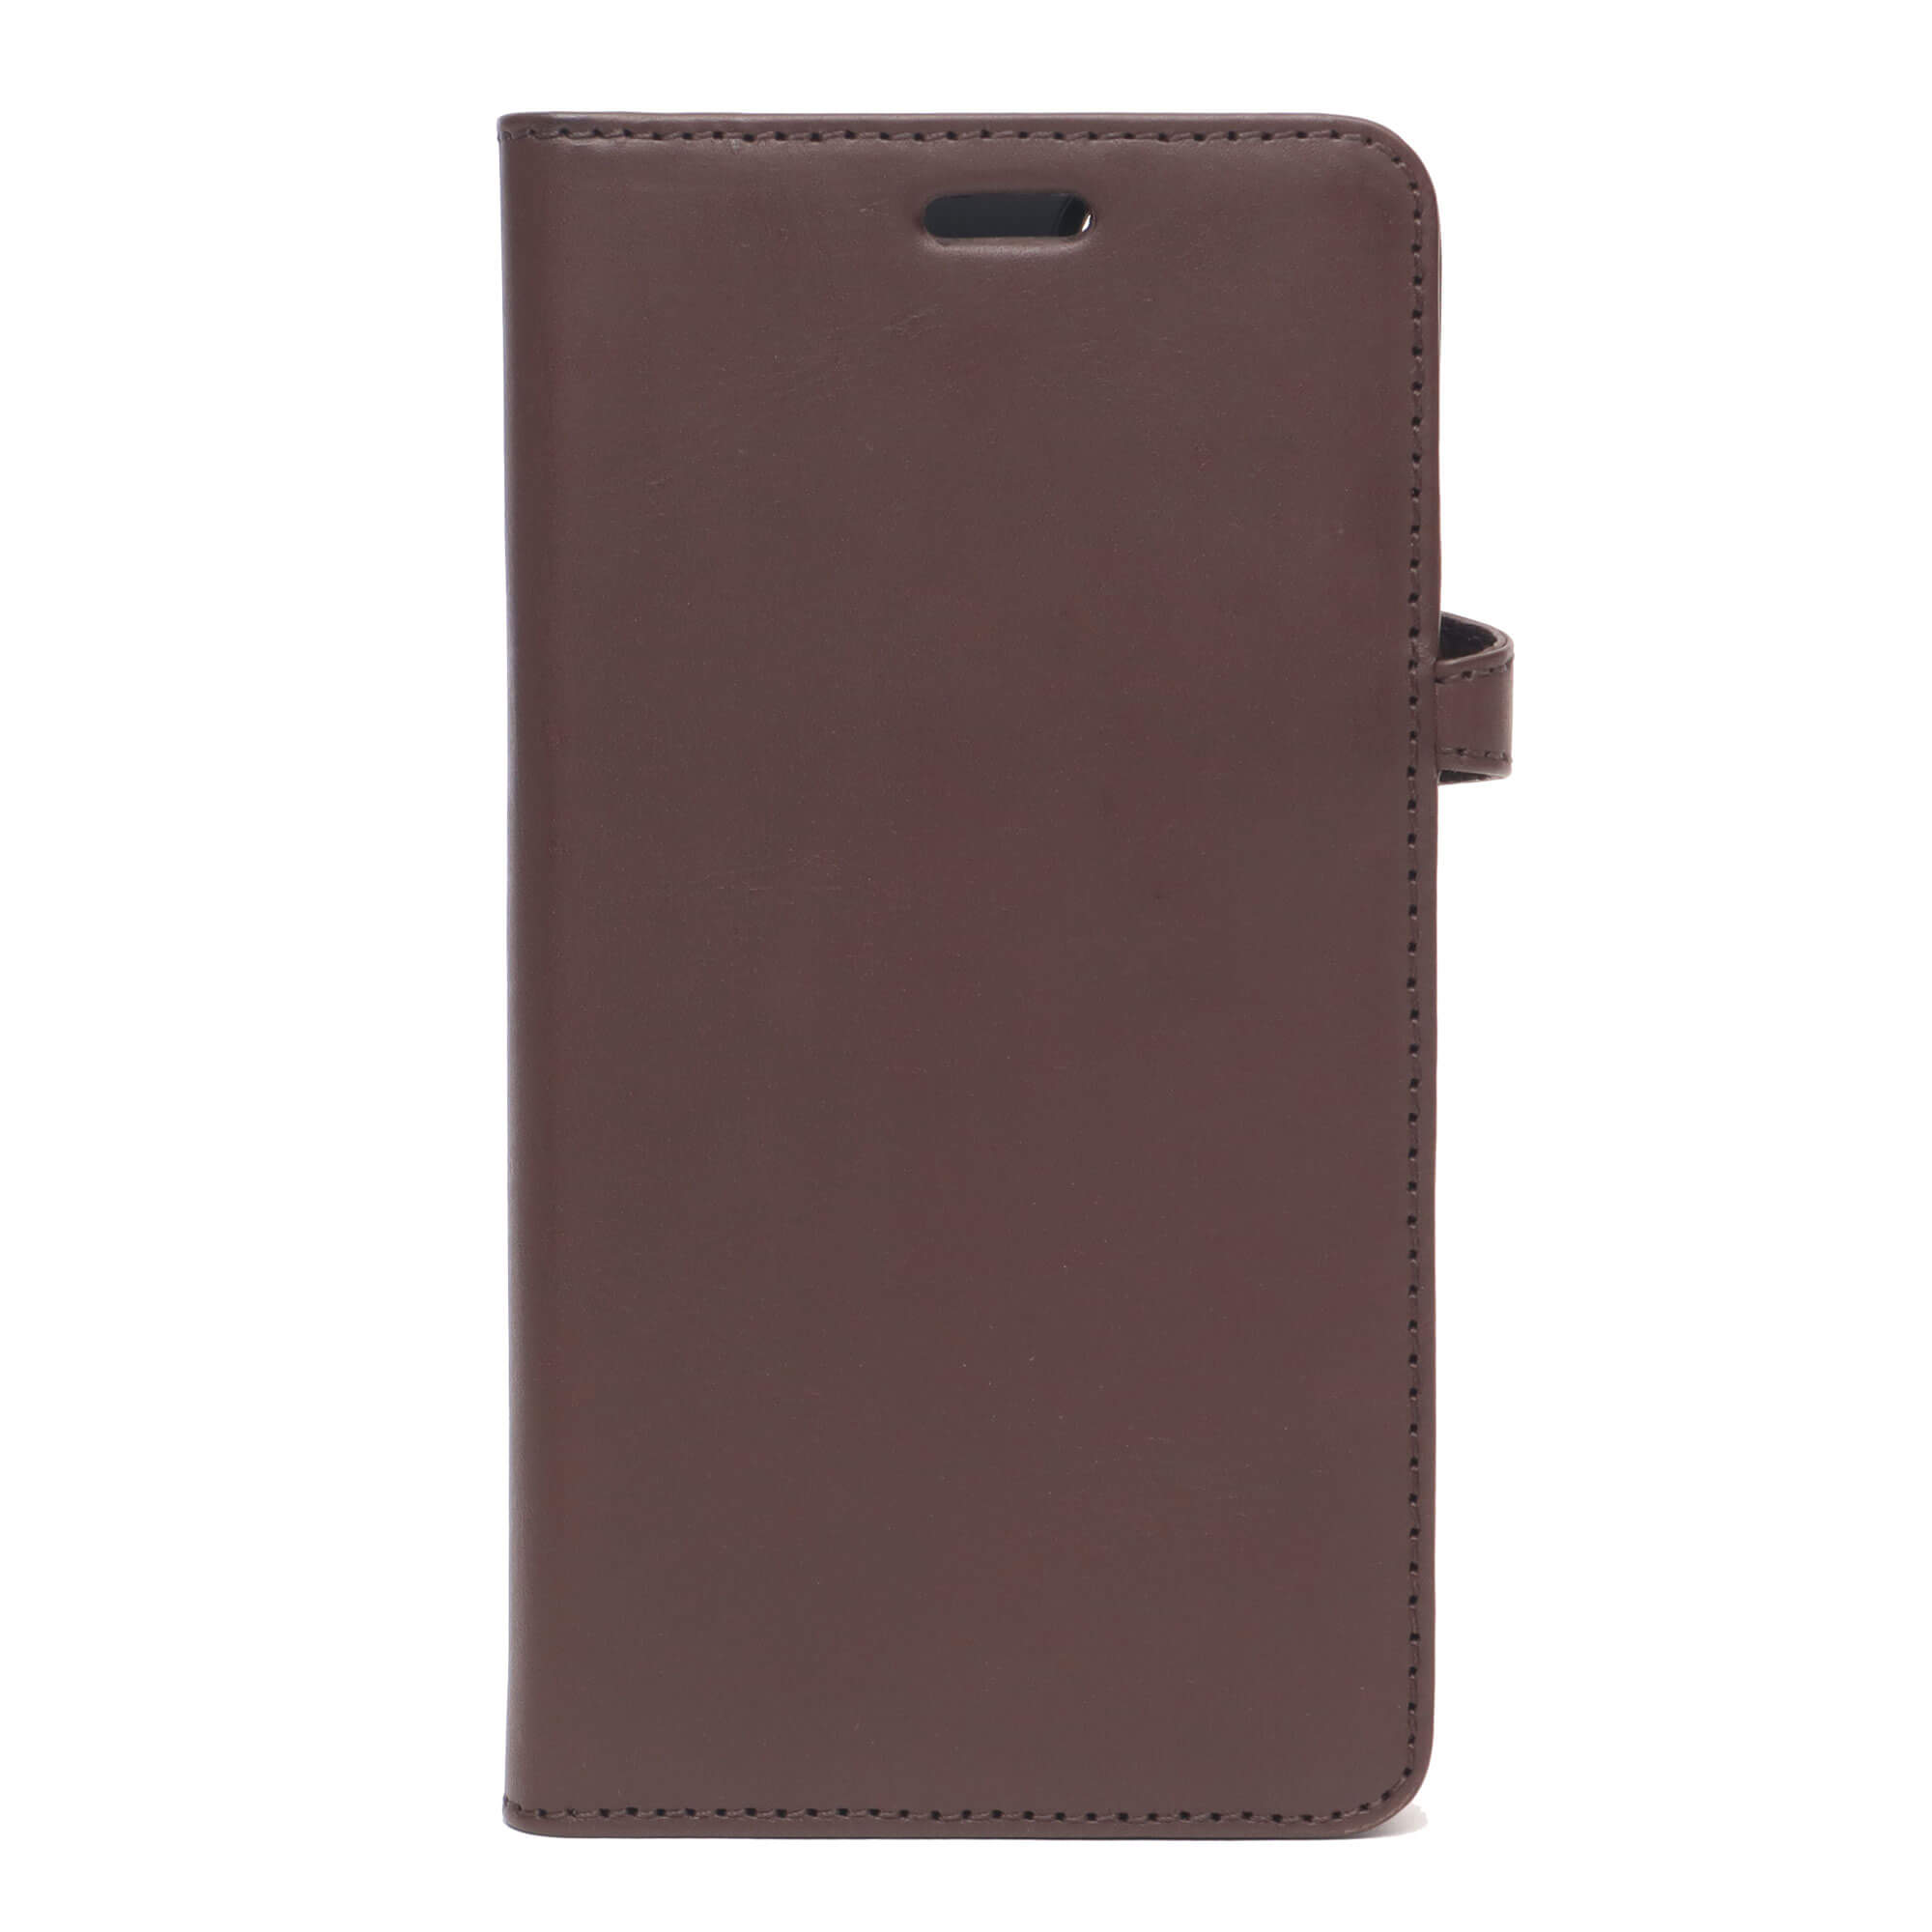 Wallet Case Brown - iPhone 11 Pro Max 